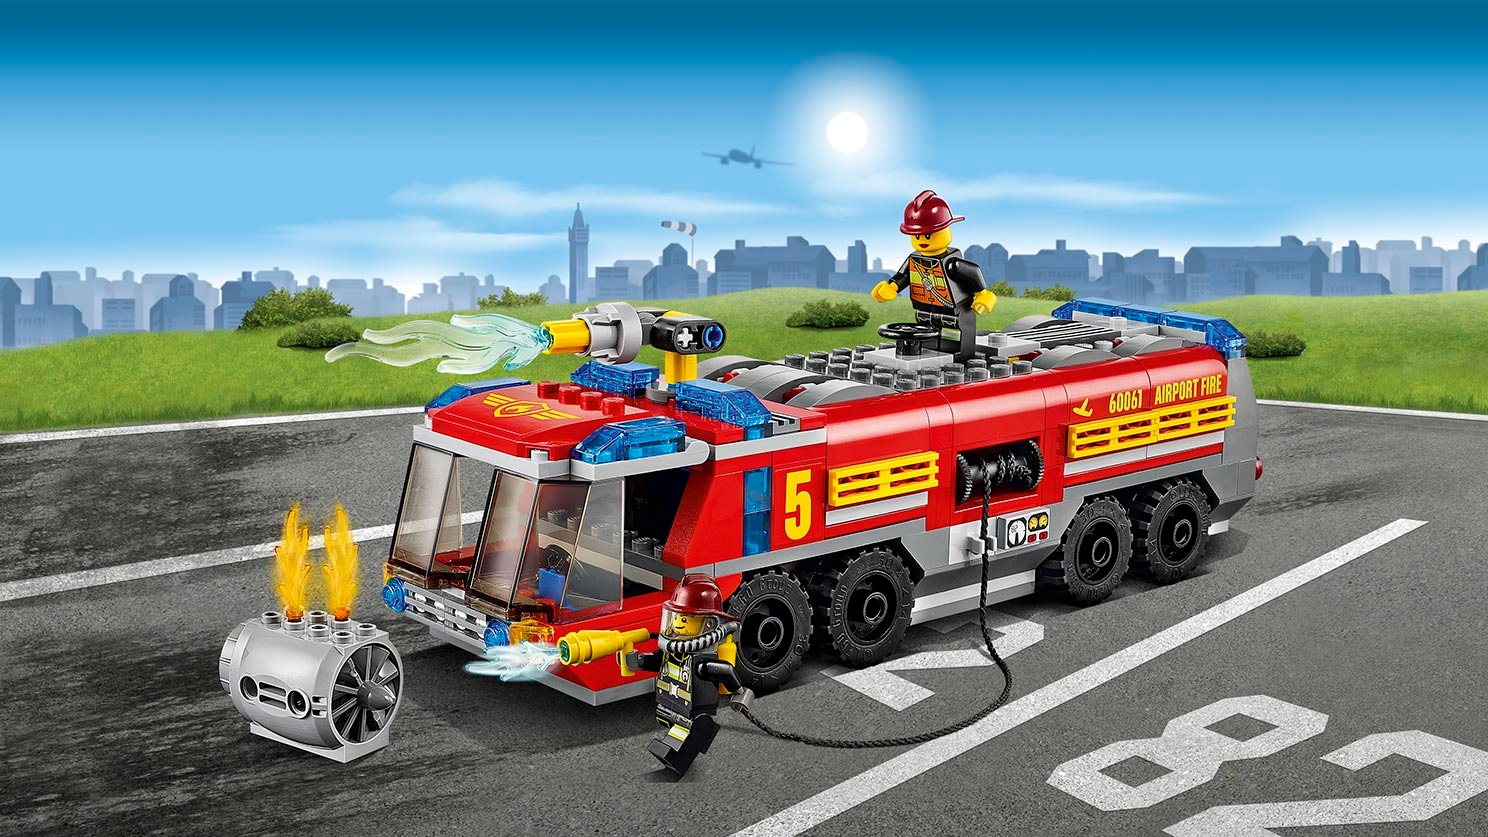 unse bøf Justerbar Airport Fire Truck 60061 - LEGO® City Sets - LEGO.com for kids